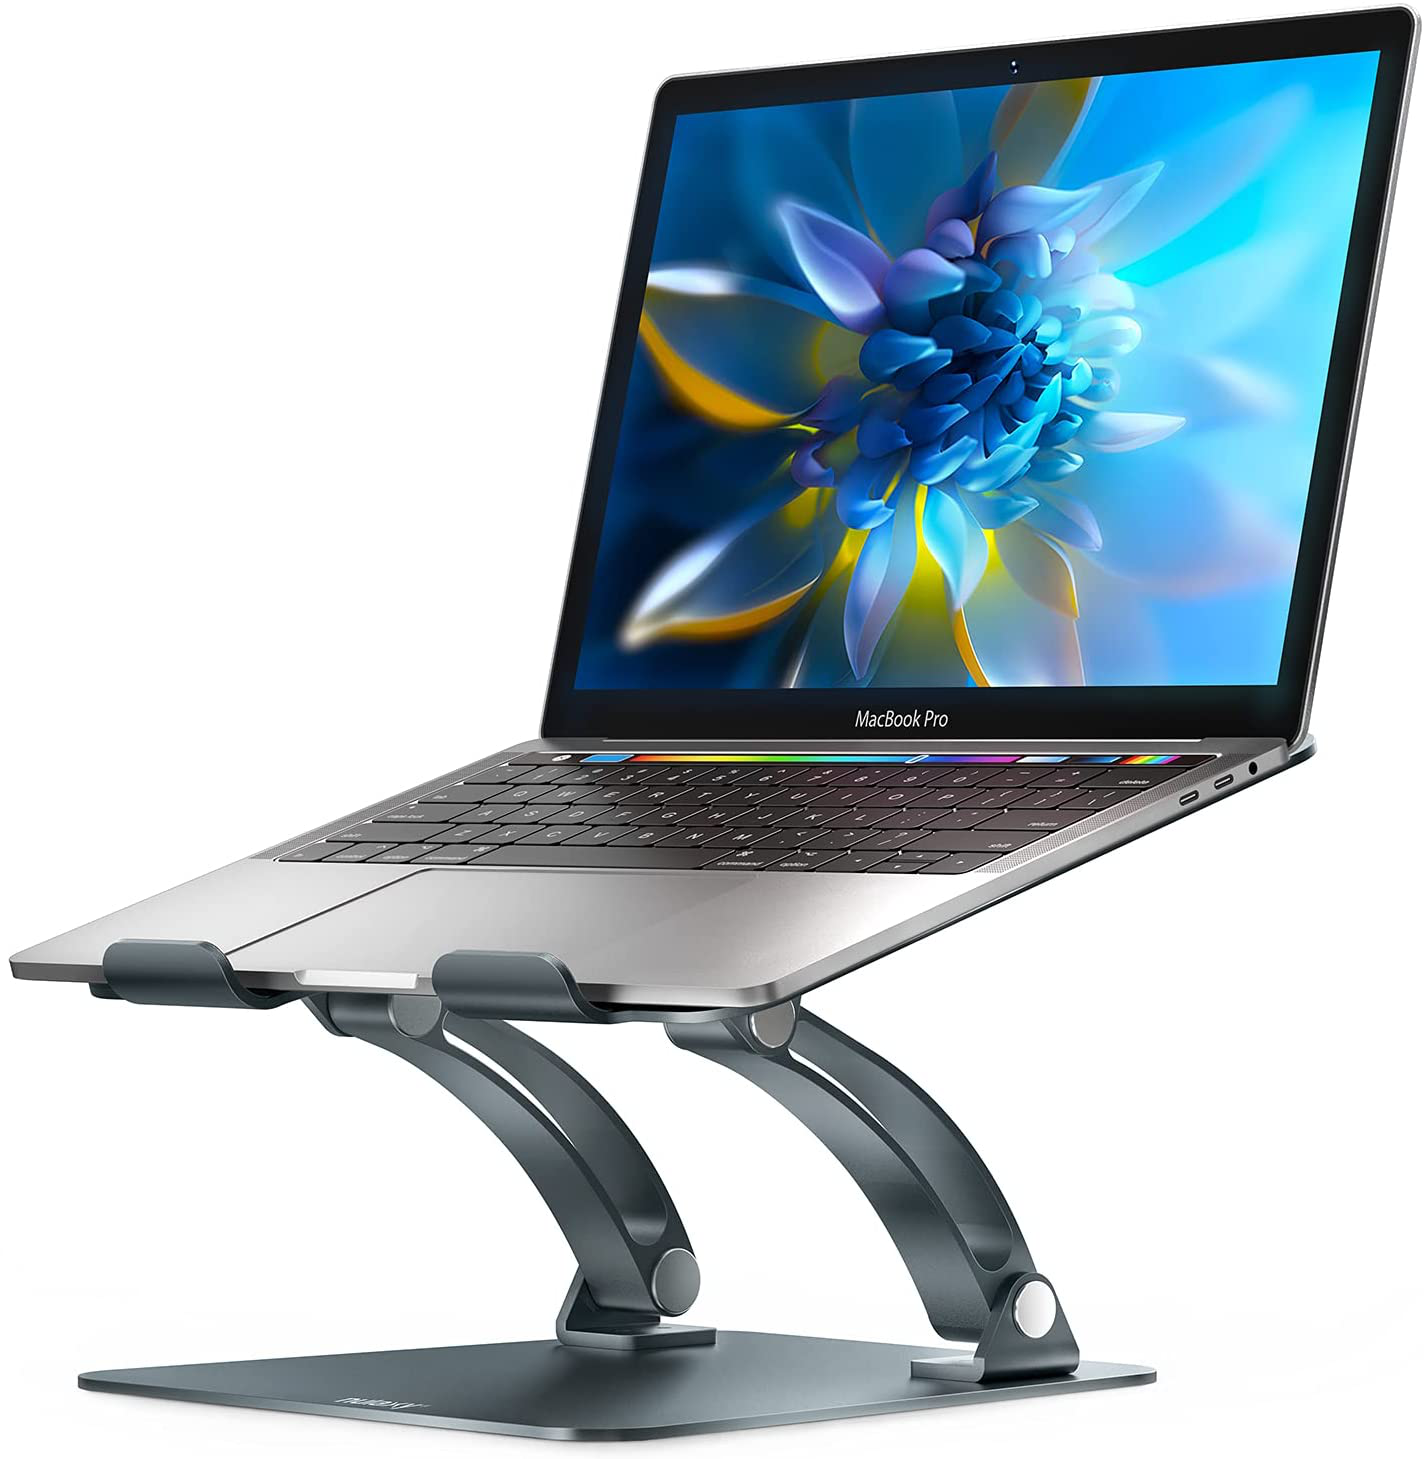 Nulaxy Laptop Stand, Ergonomic Height Angle Adjustable Computer Laptop Holder Compatible with All Laptops 11-17", Supports Up to 44 Lbs